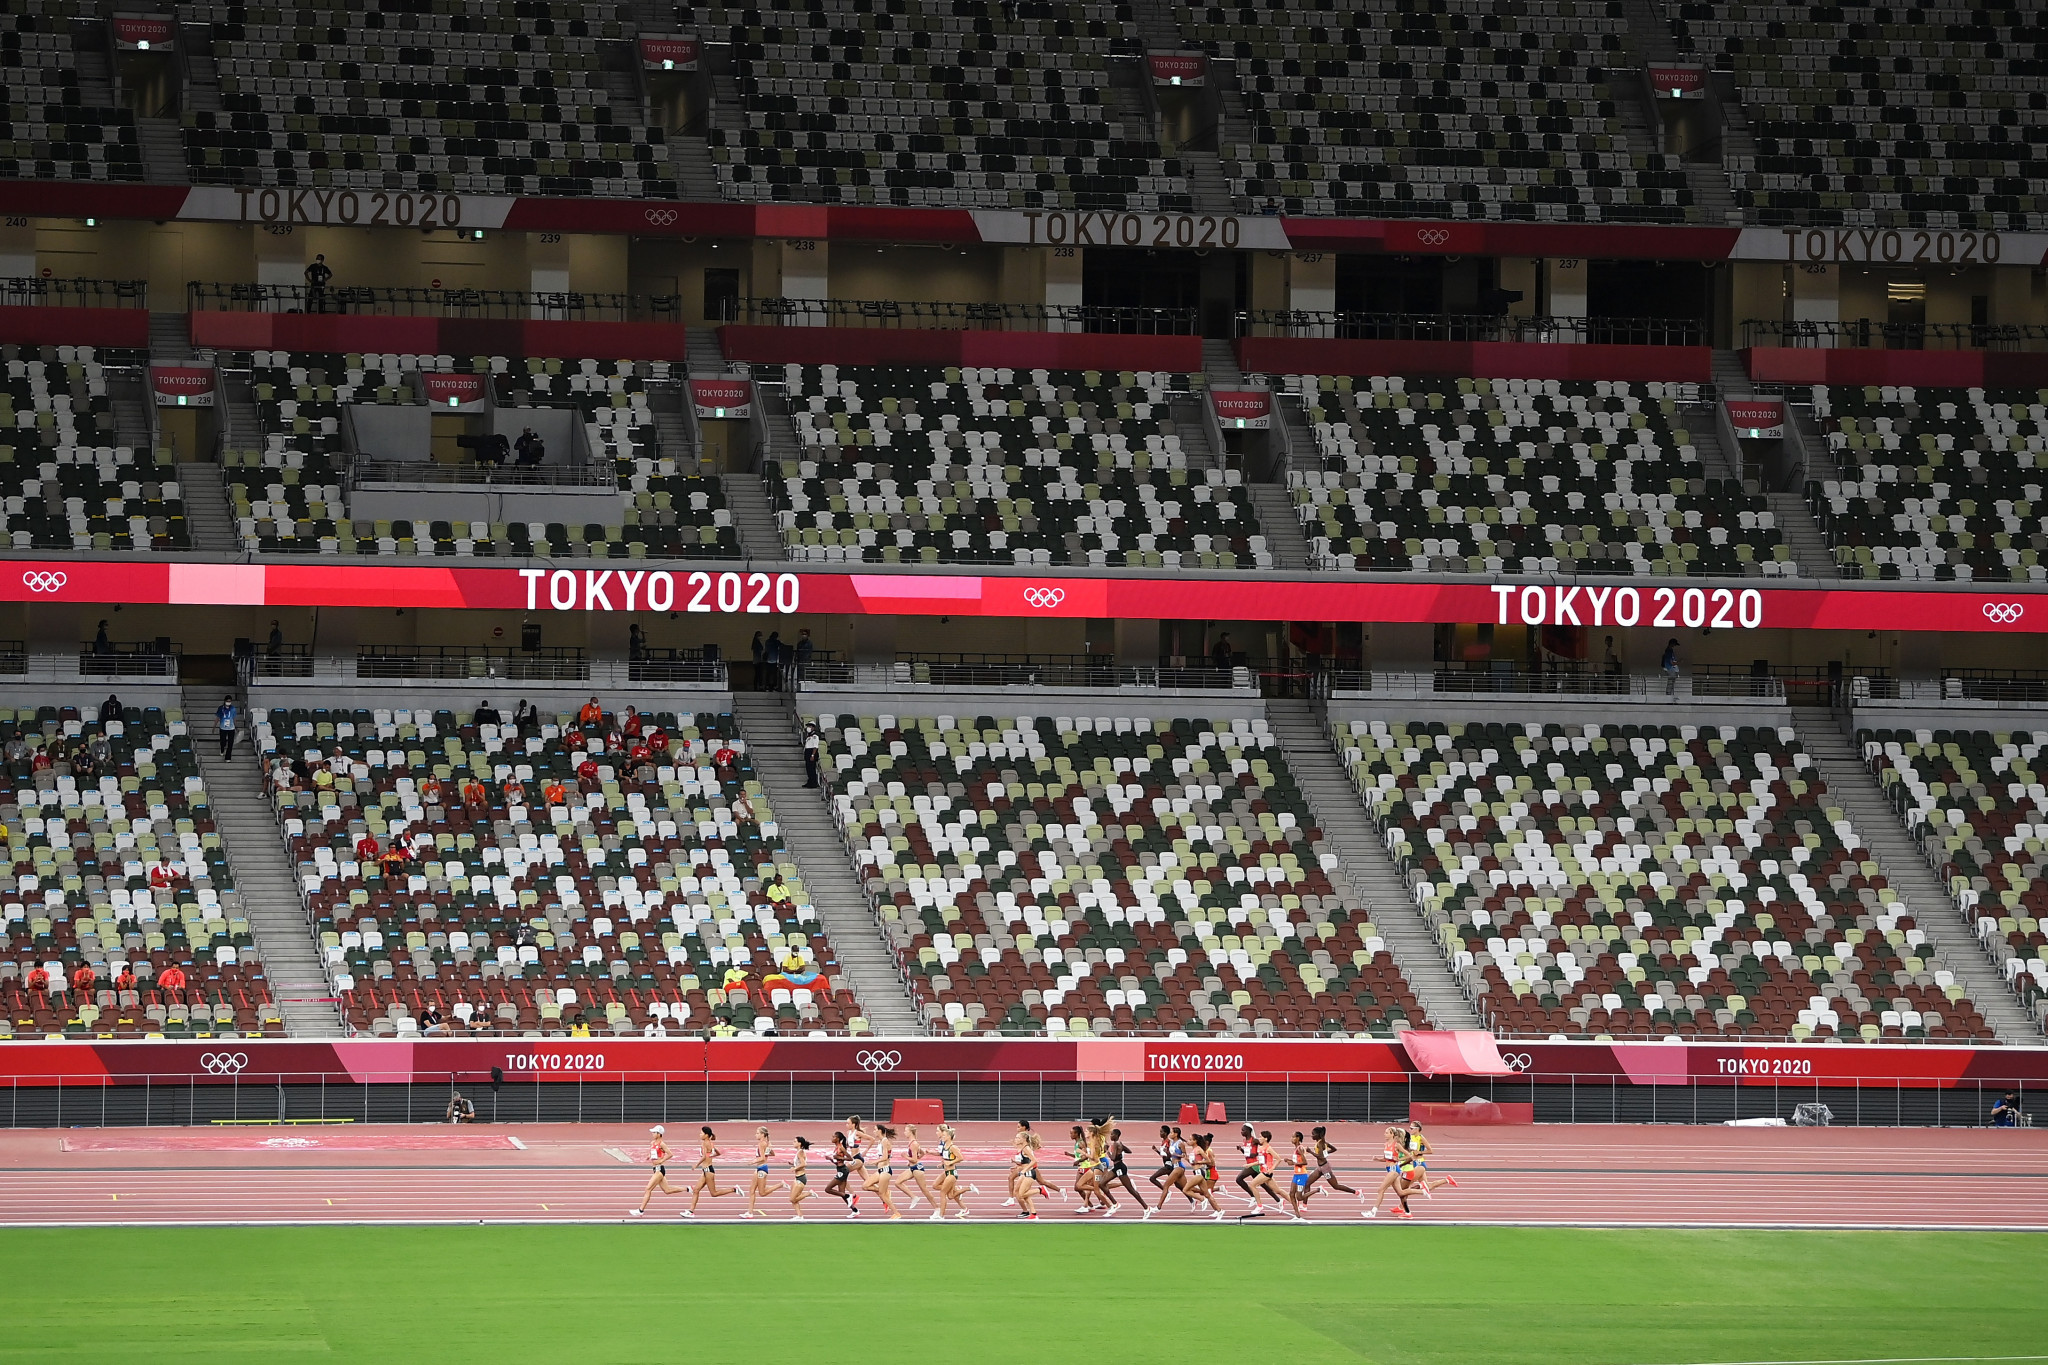 Spectators were unable to attend events at the Japan National Stadium at last year's Olympics and Paralympics ©Getty Images